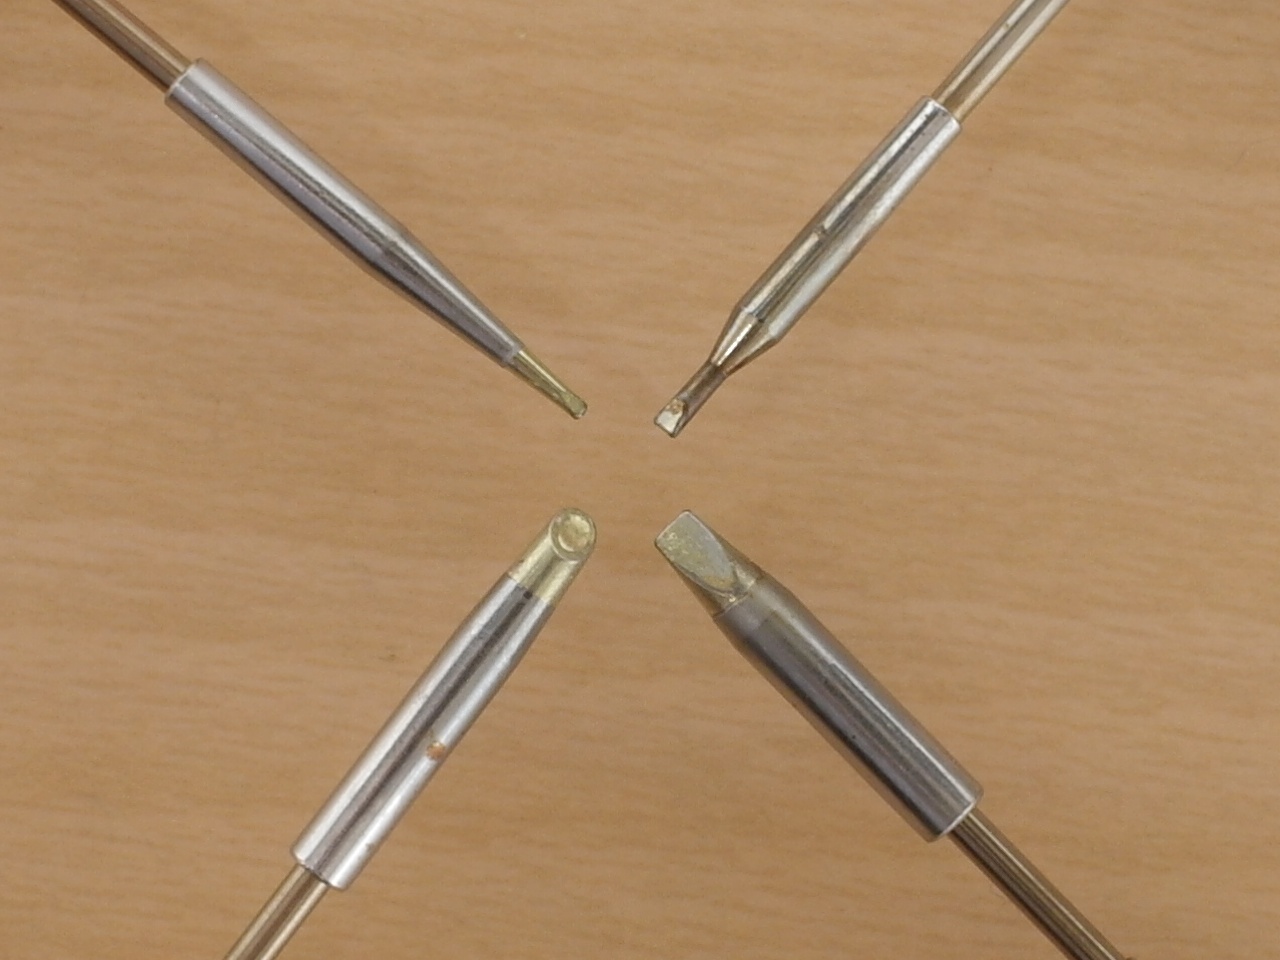 Weller soldering tips close-up, 0.8x0.4mm, 1.2x0.4mm, 2.0x0.4mm, and a &quot;gull wing&quot; tip for drag soldering.